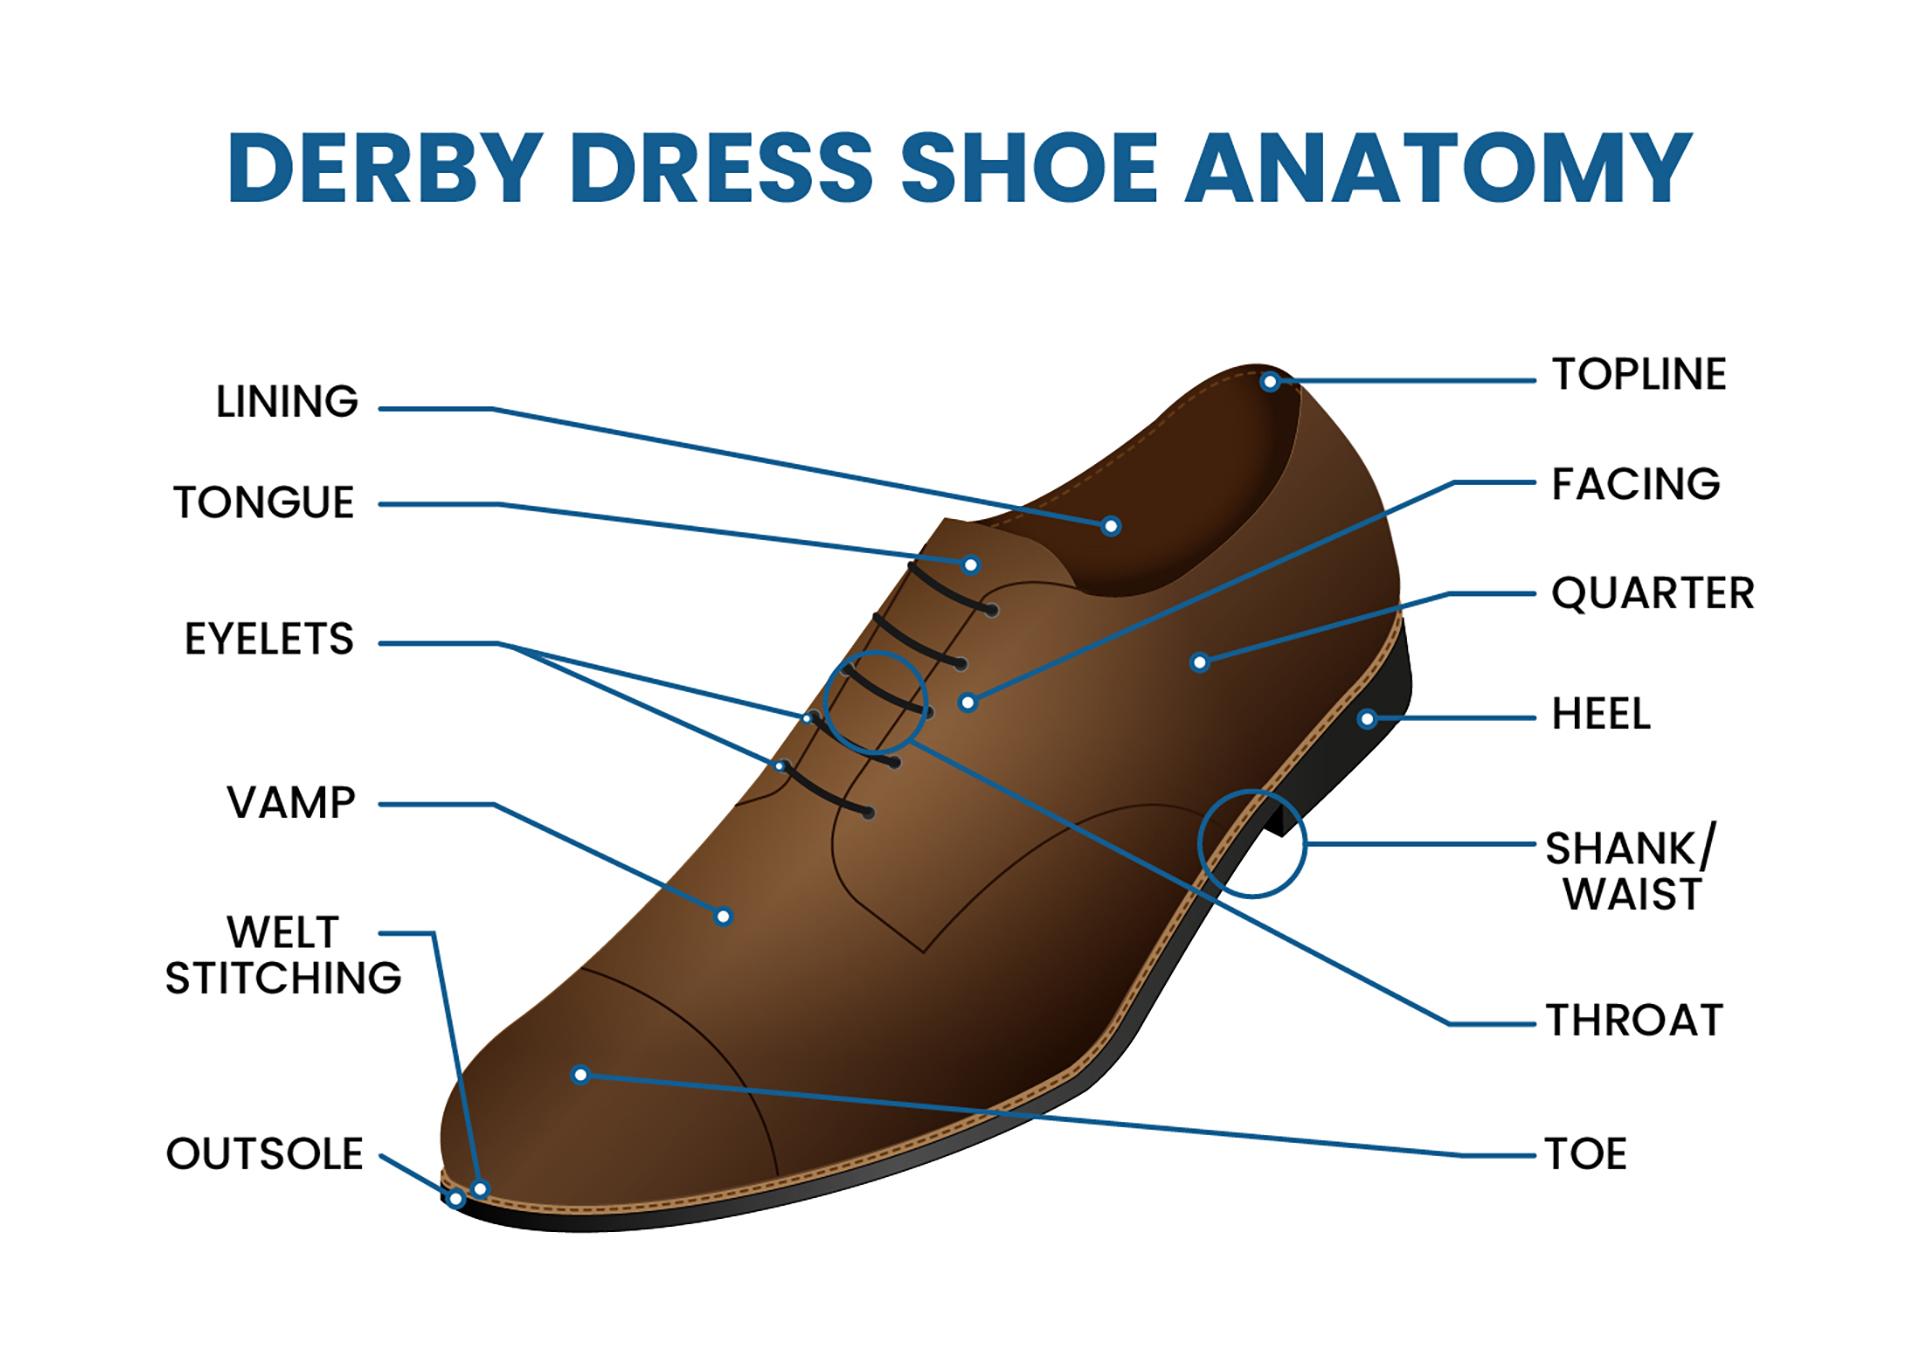 The anatomy of a derby shoe